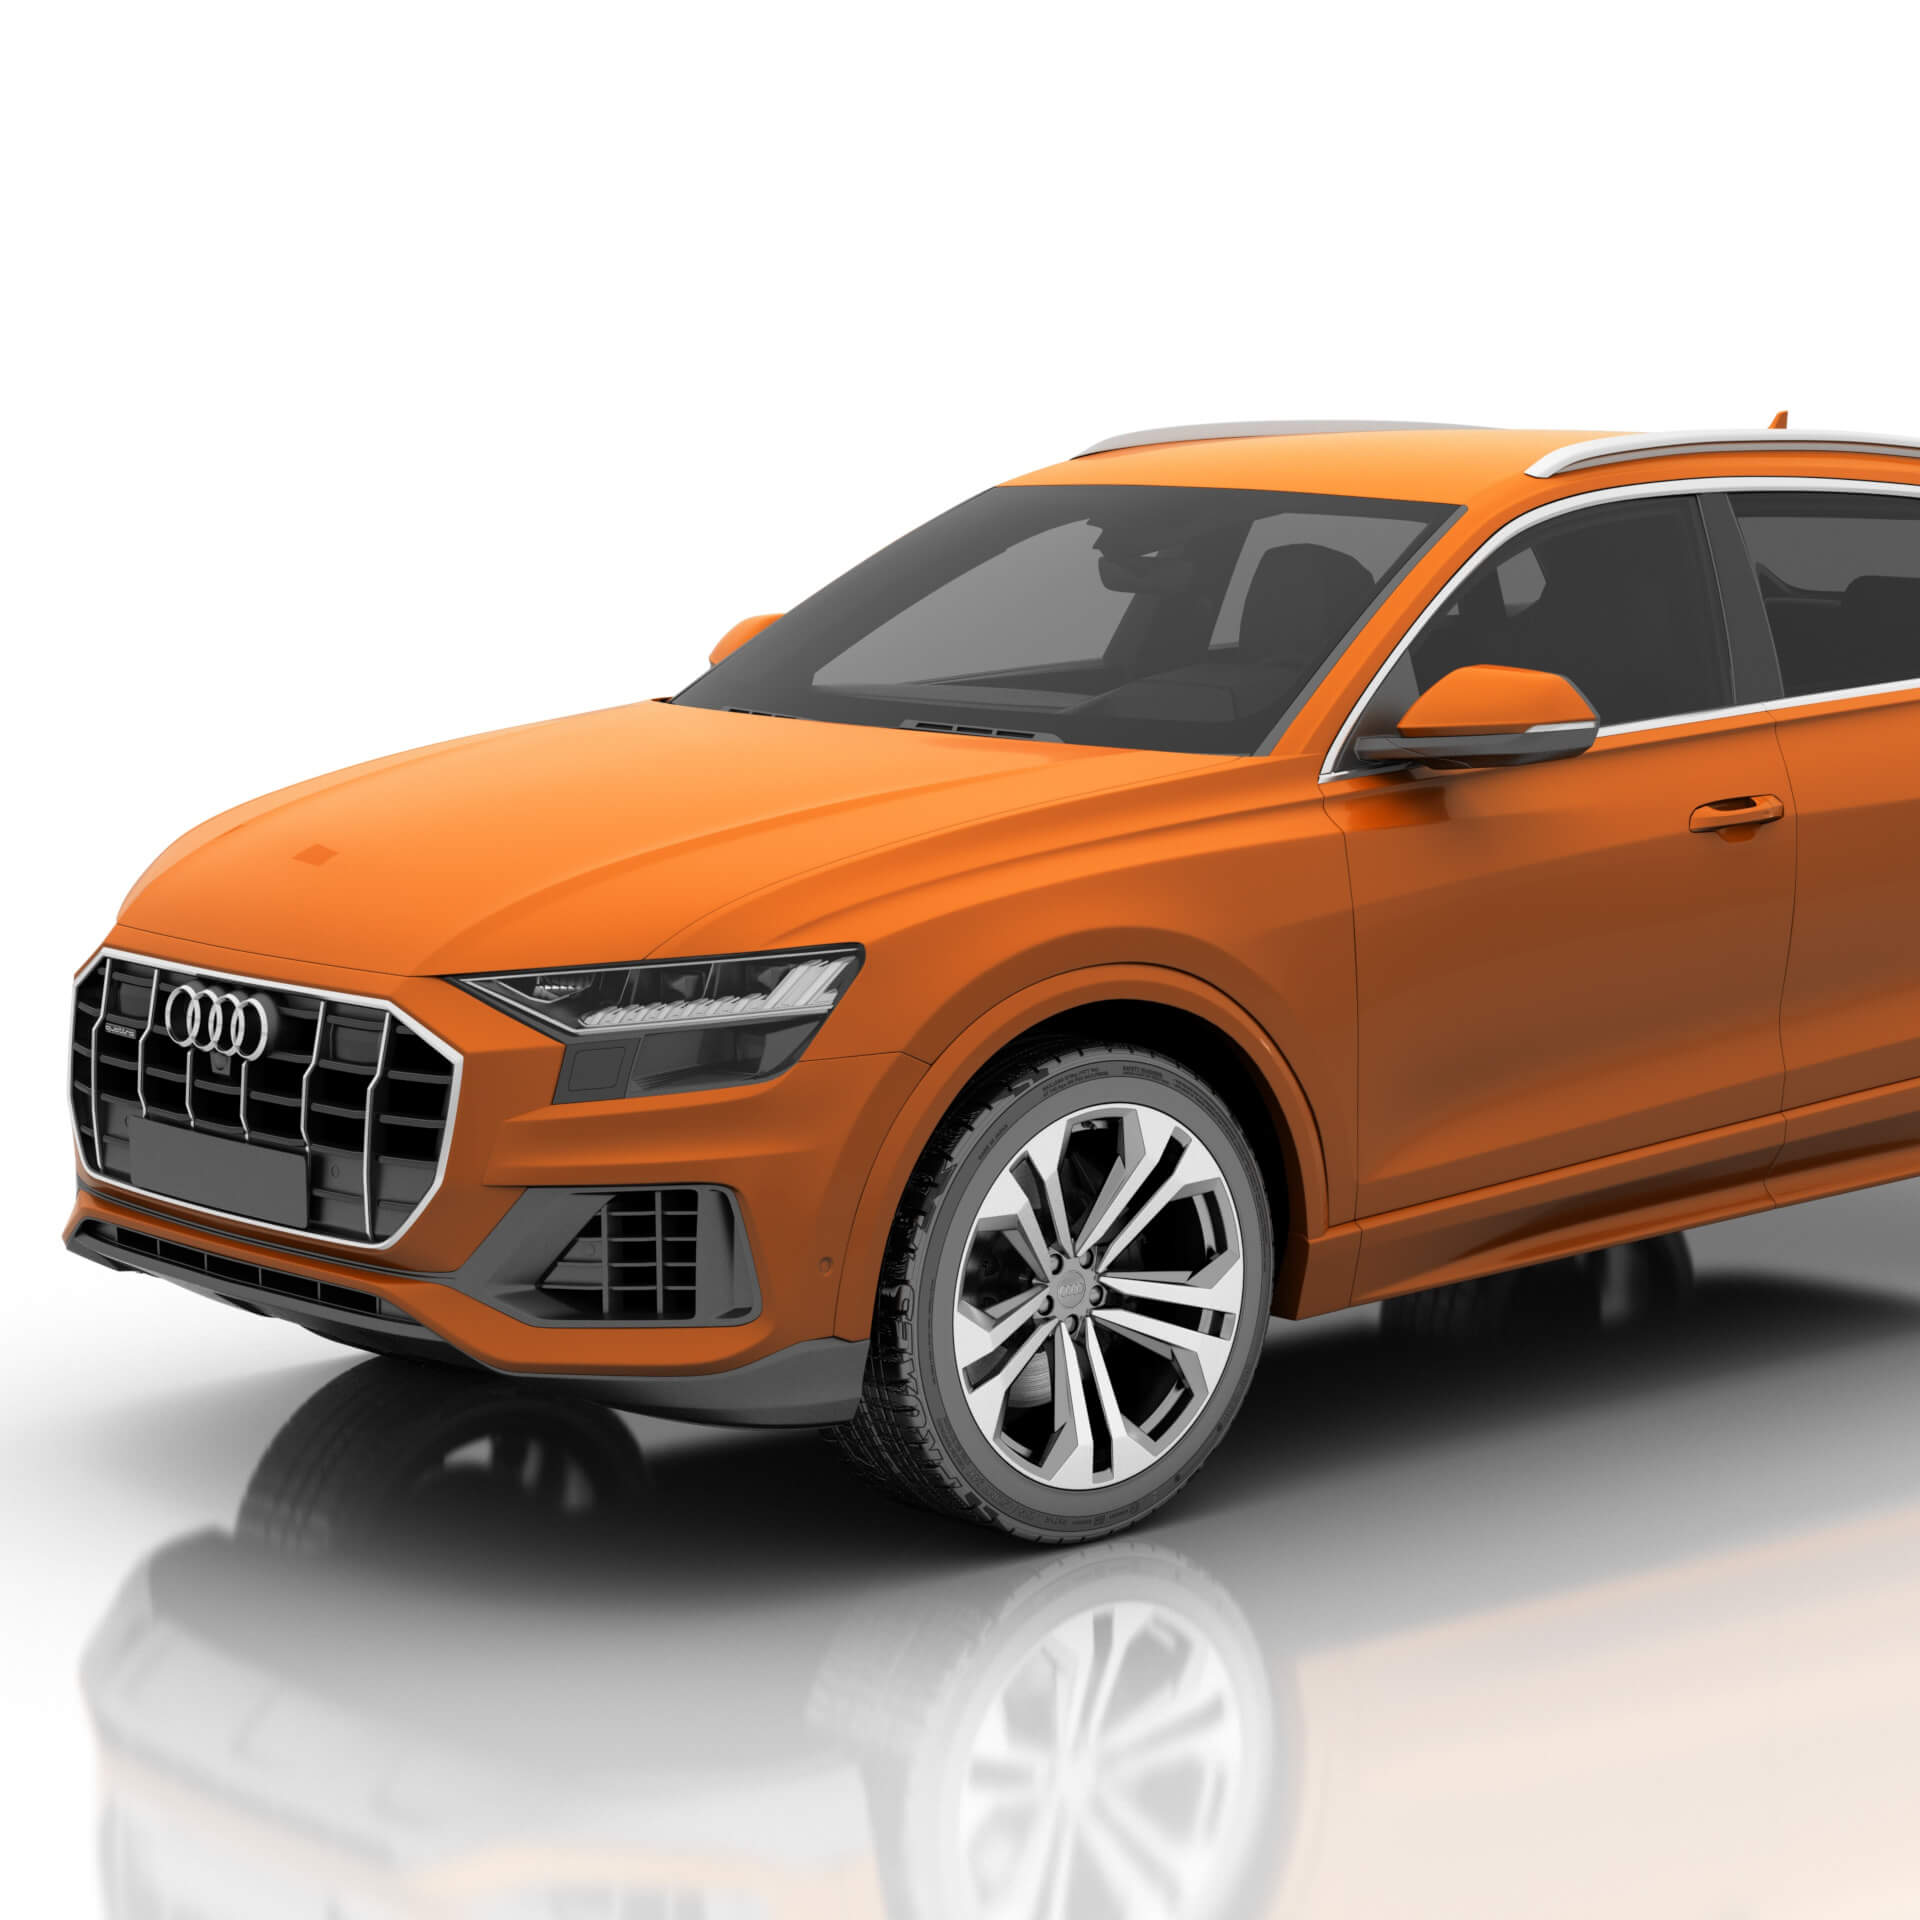 Direct4x4 accessories for Audi Q8 vehicles with a photo of a orange Audi Q8 on a white background